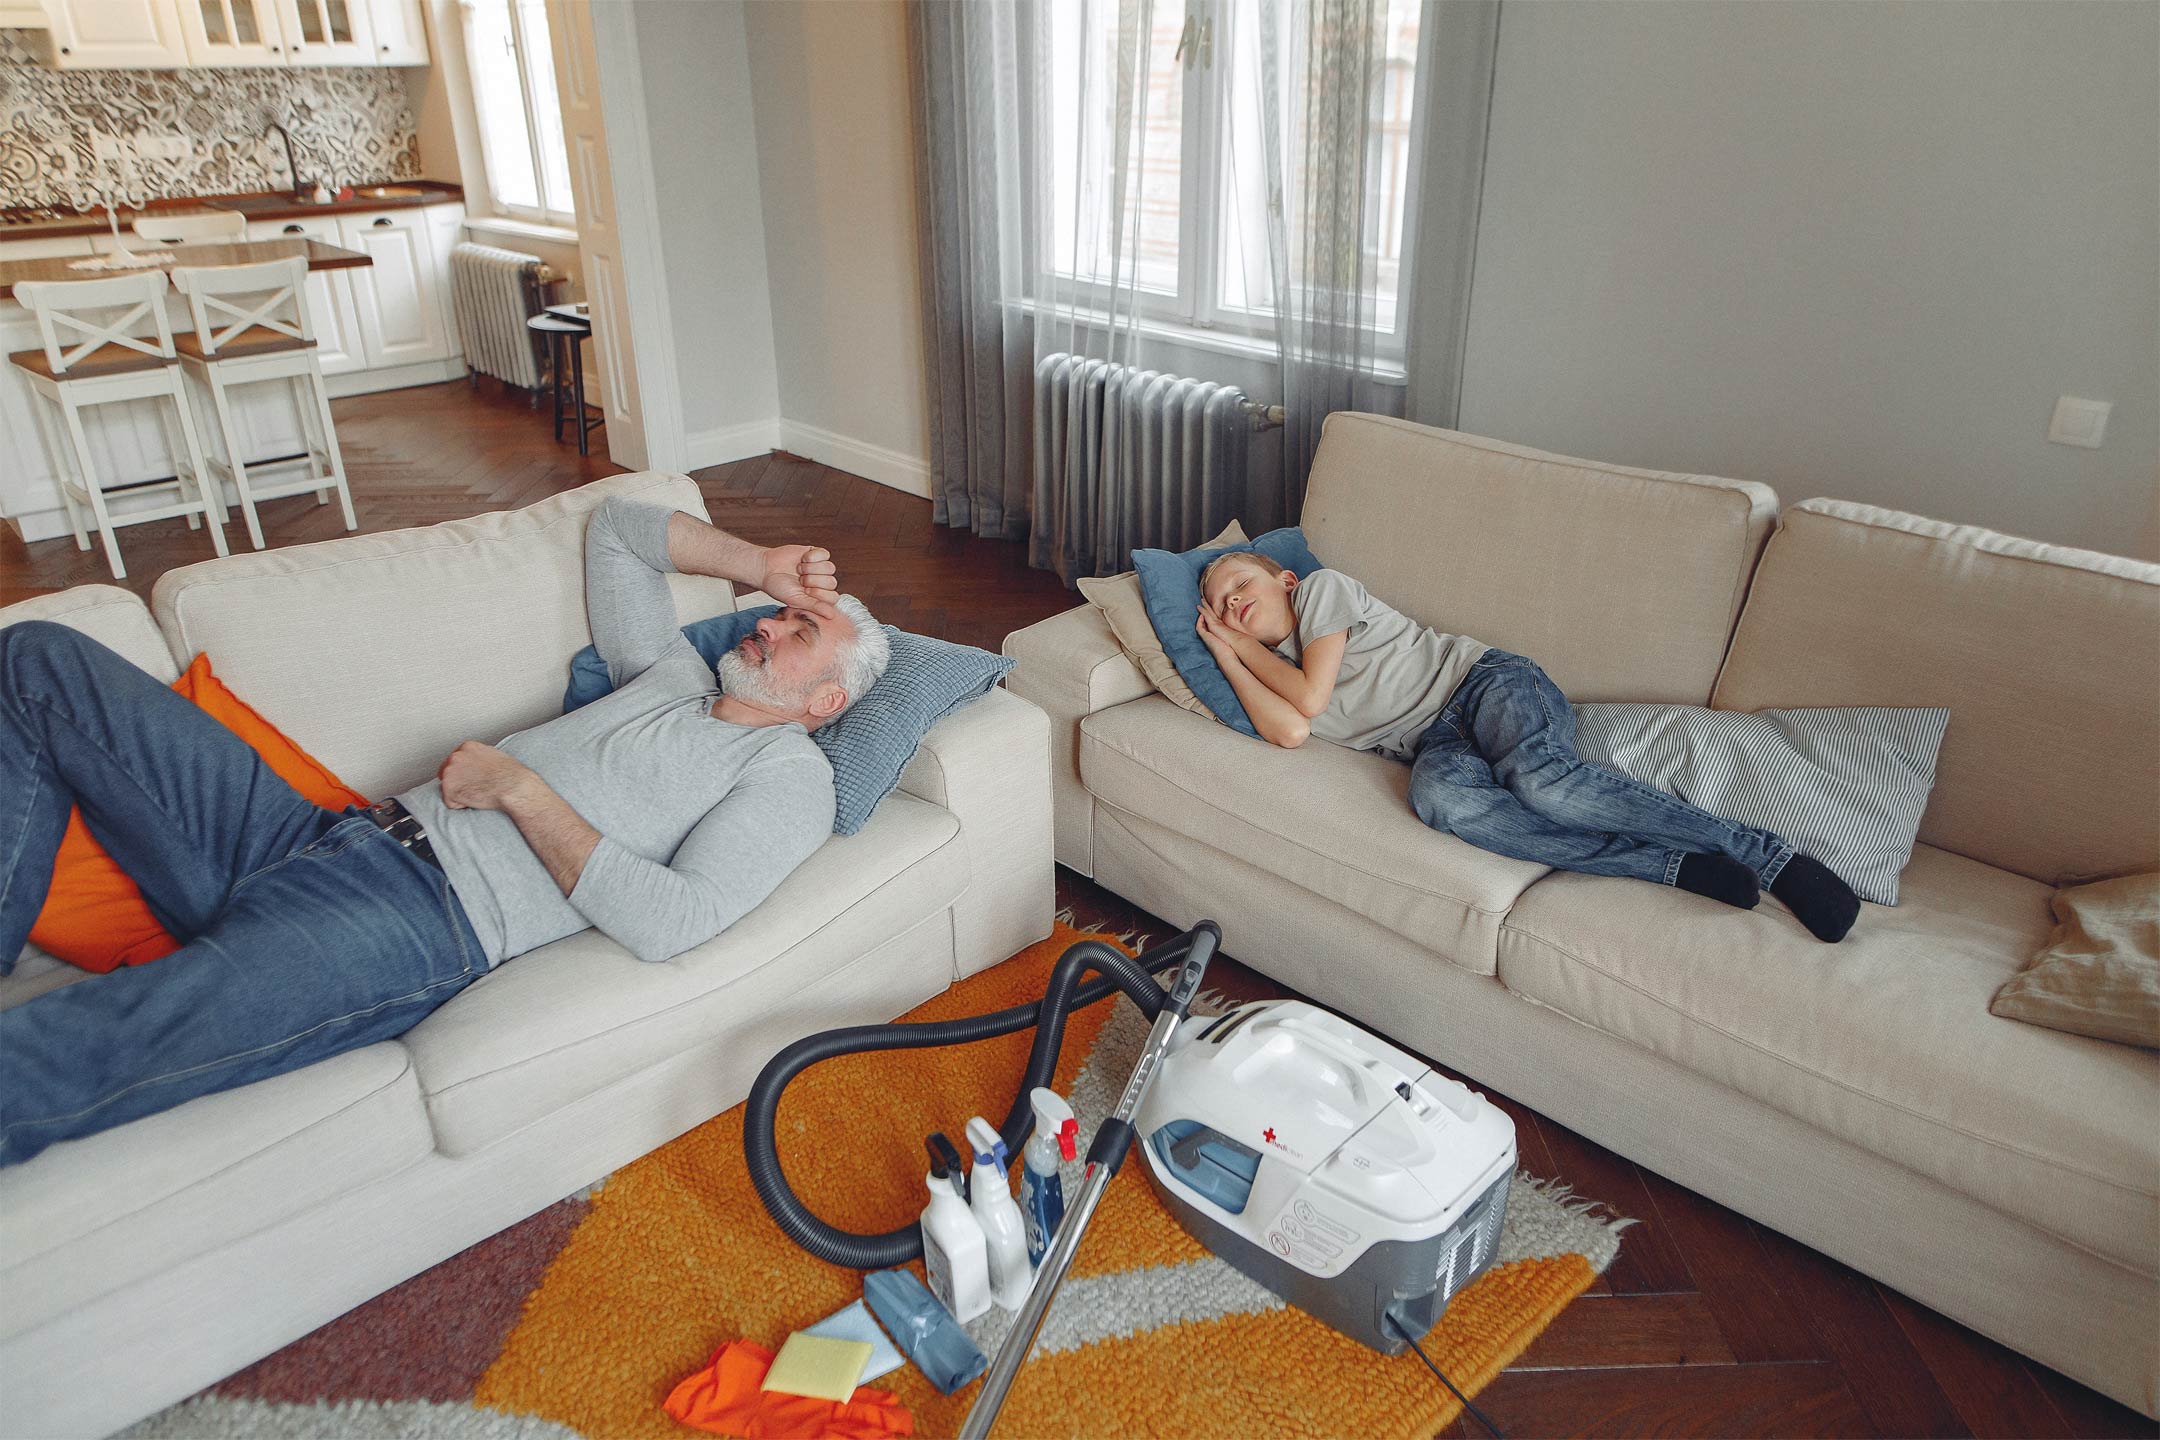 father-son-cleaning-sleeping-on-couch2160